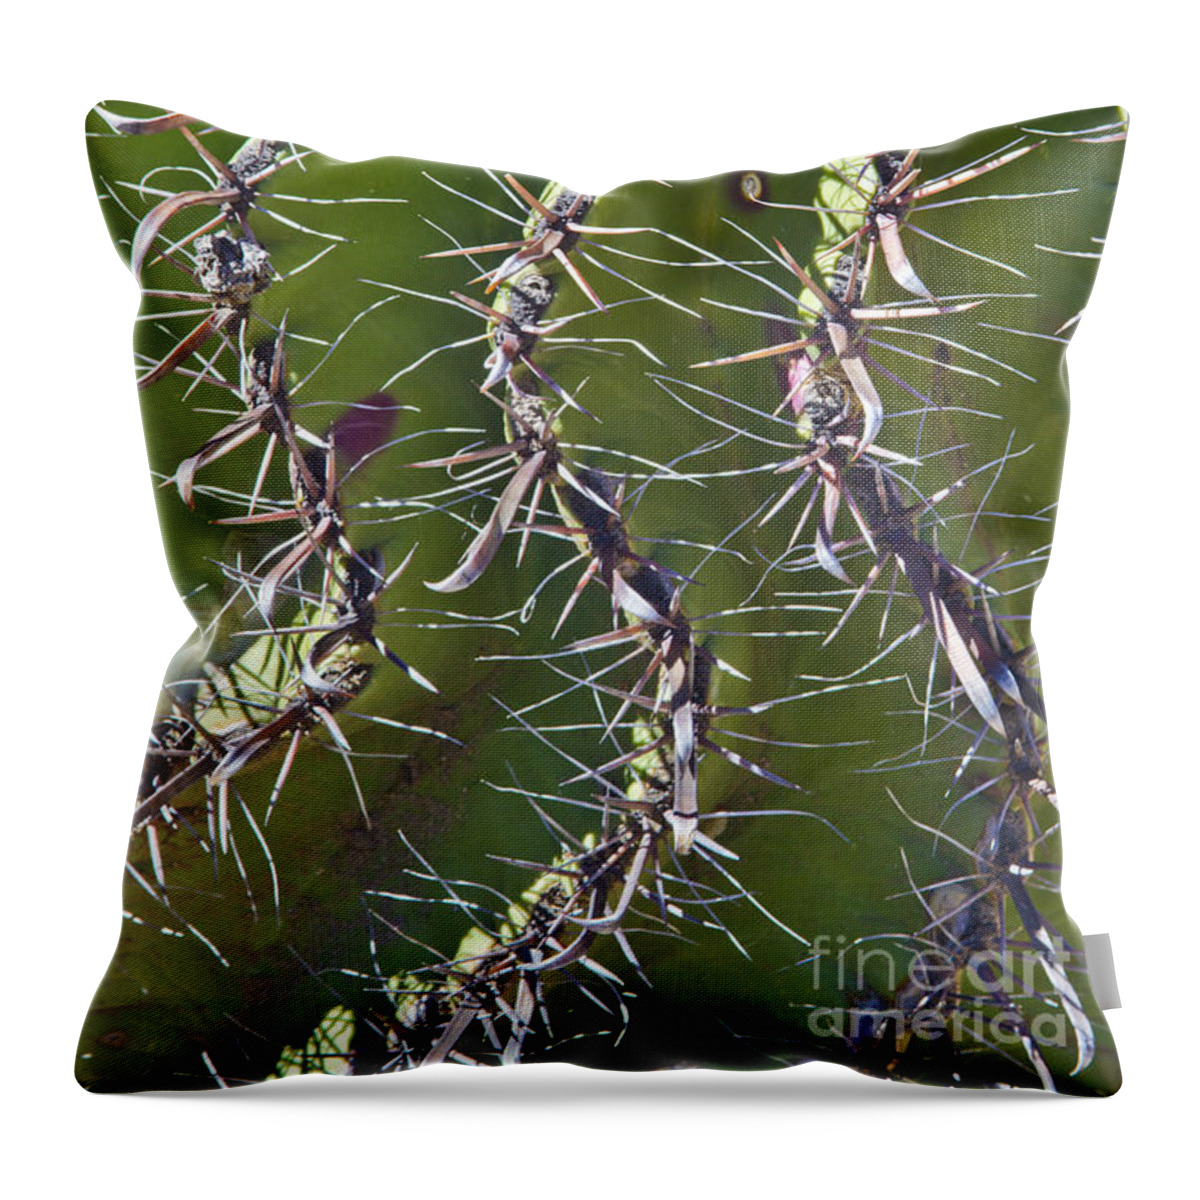 Arizona Throw Pillow featuring the photograph Twisted by Kathy McClure